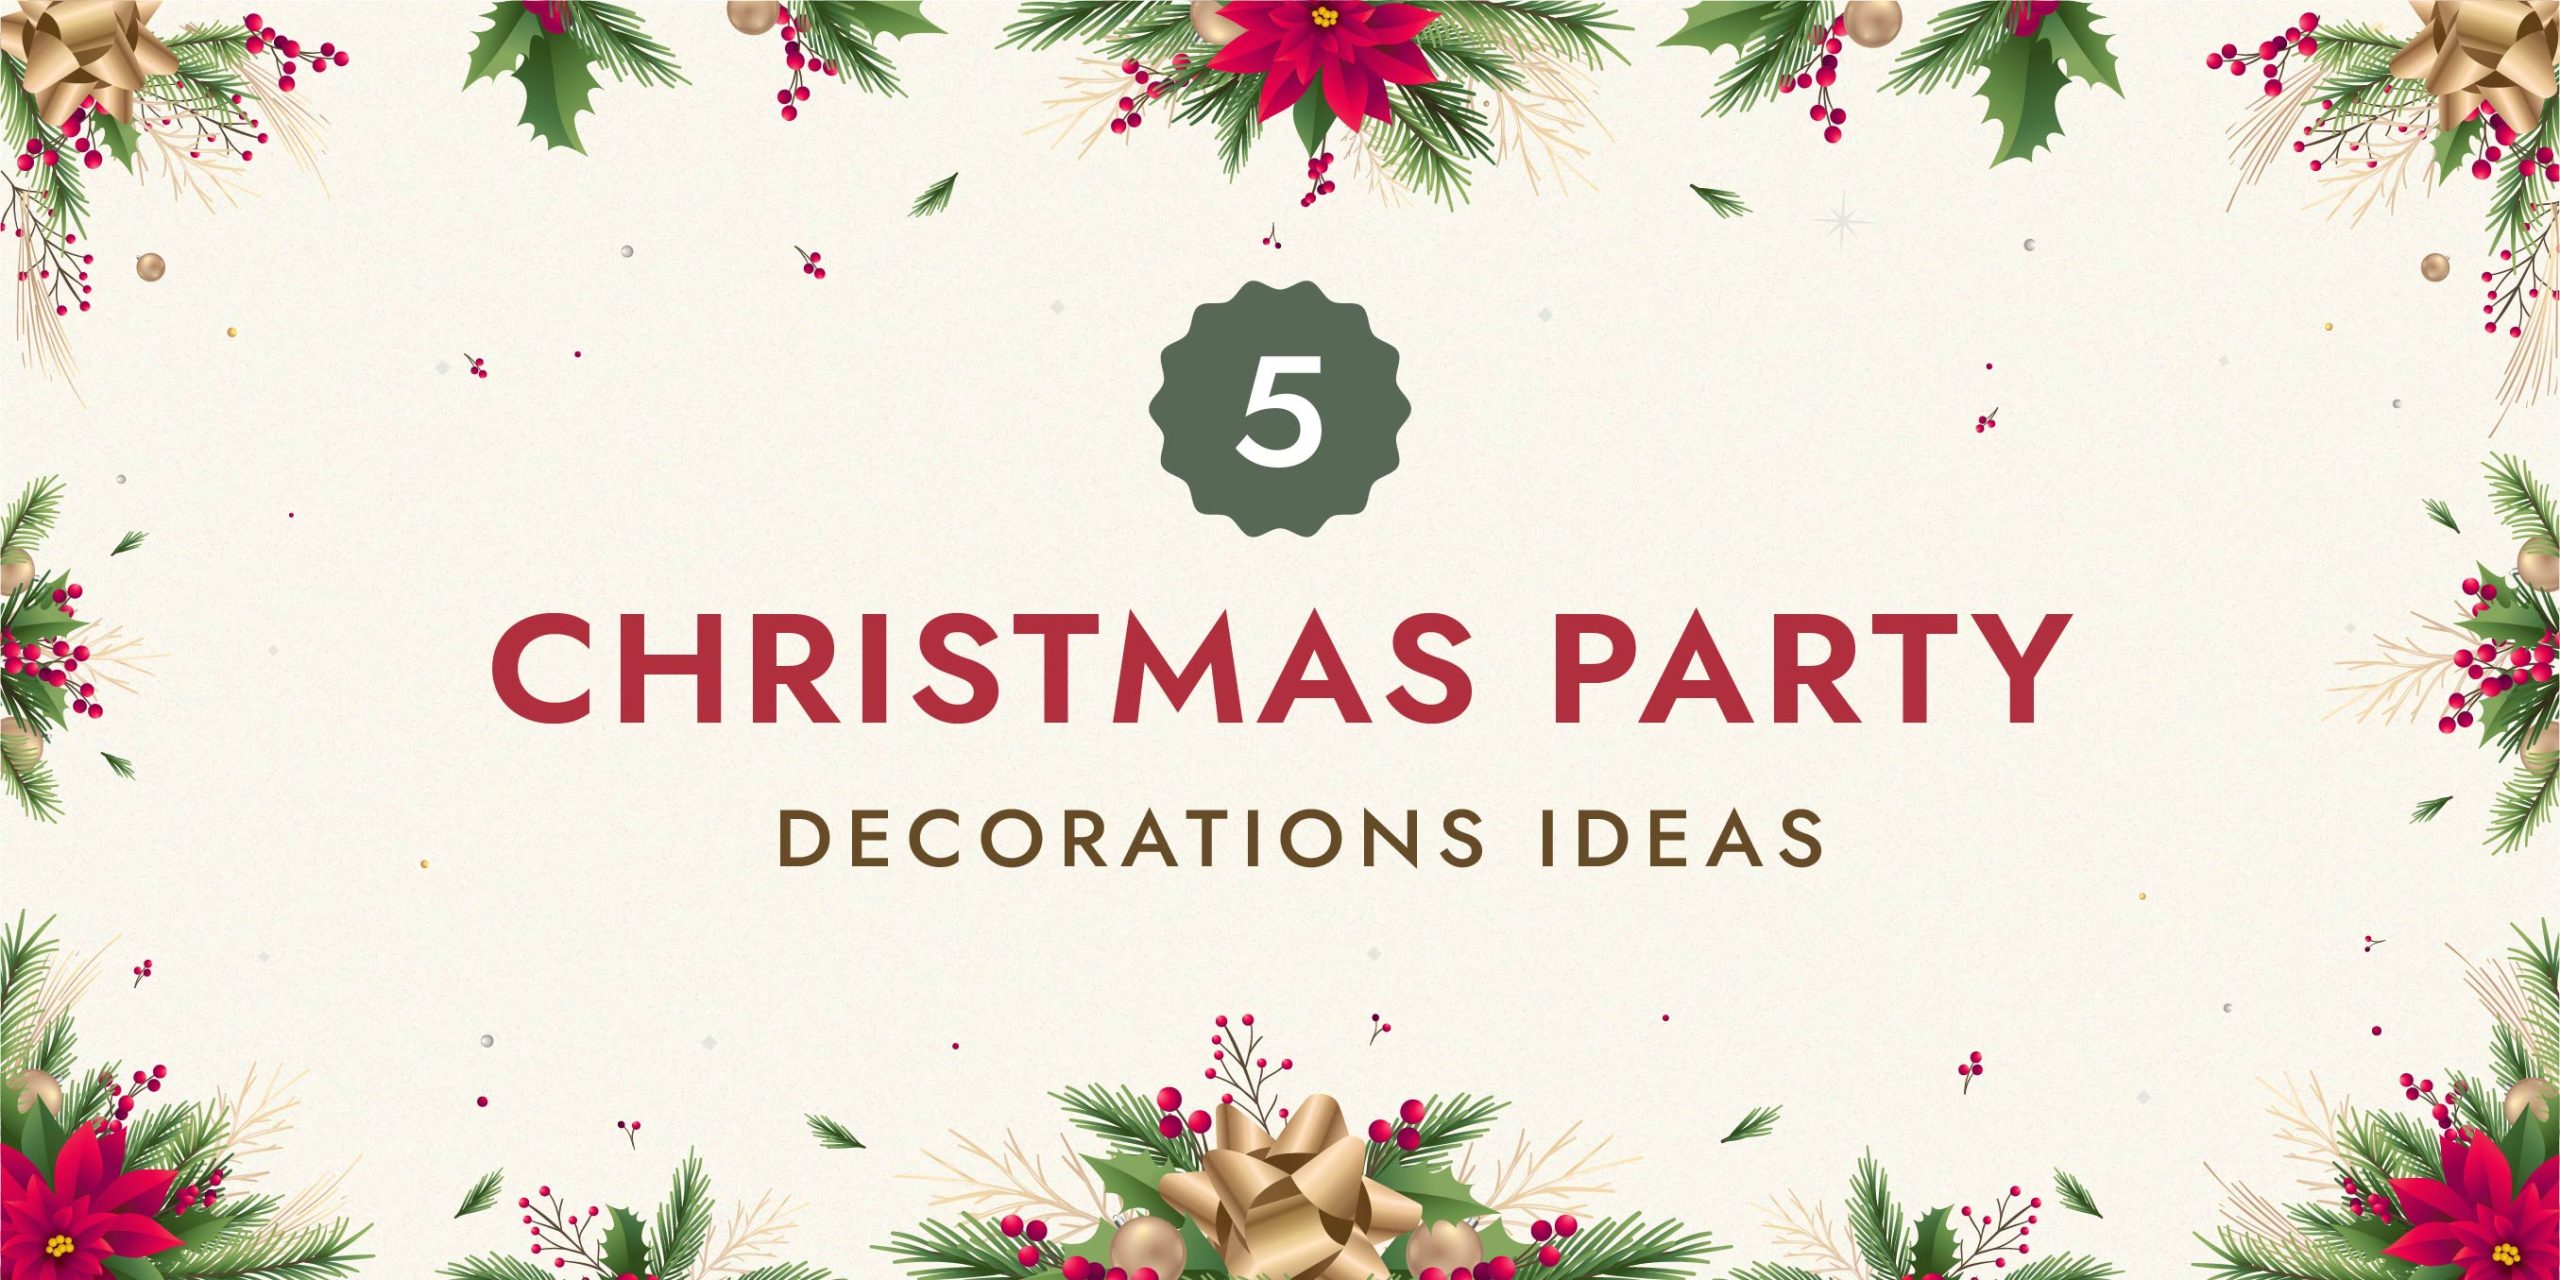 Christmas Party Decorations Ideas